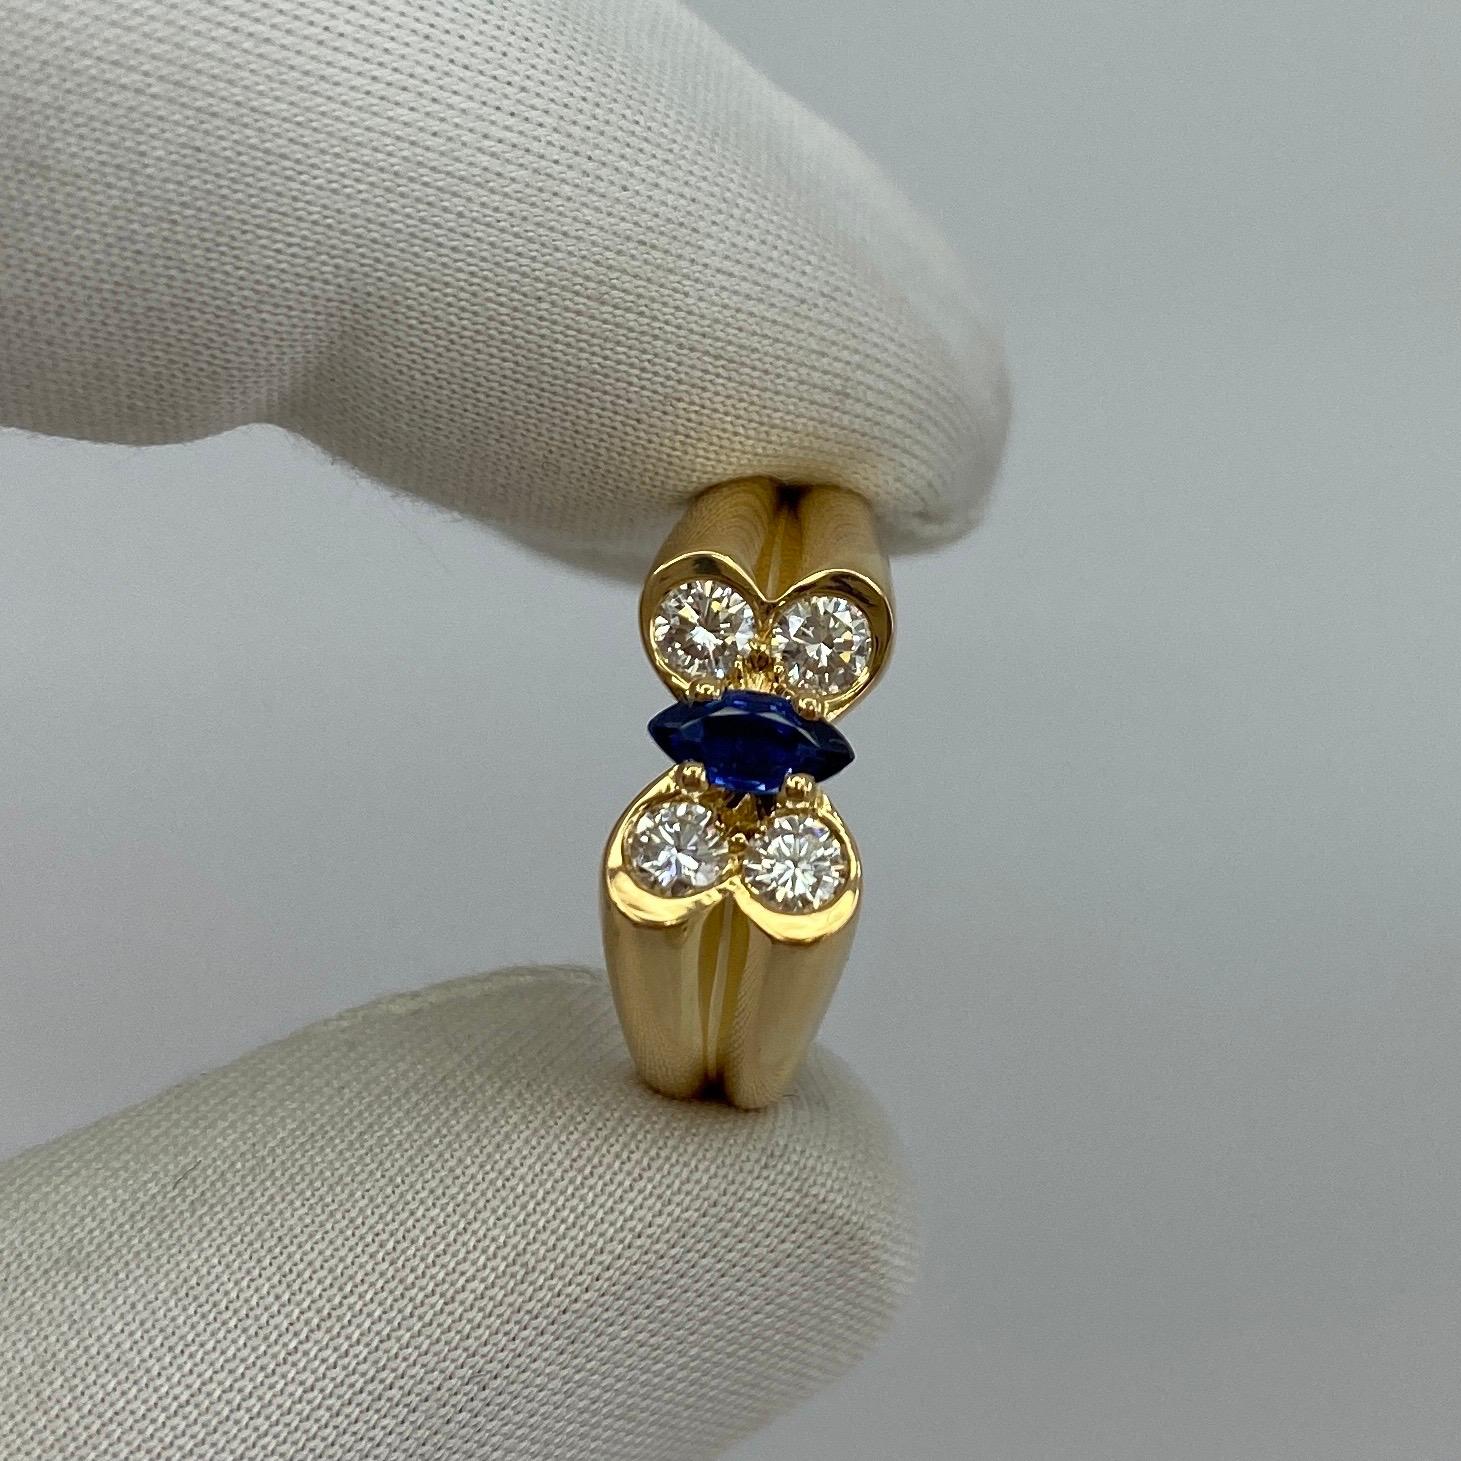 Vintage Van Cleef & Arpels Fine Blue Sapphire & Diamond 18k Yellow Gold Ring

A stunning vintage ring with a unique design typical of Van Cleef & Arpels, set with a 0.55ct marquise/navette cut fine vivid blue sapphire & 4 excellent quality white